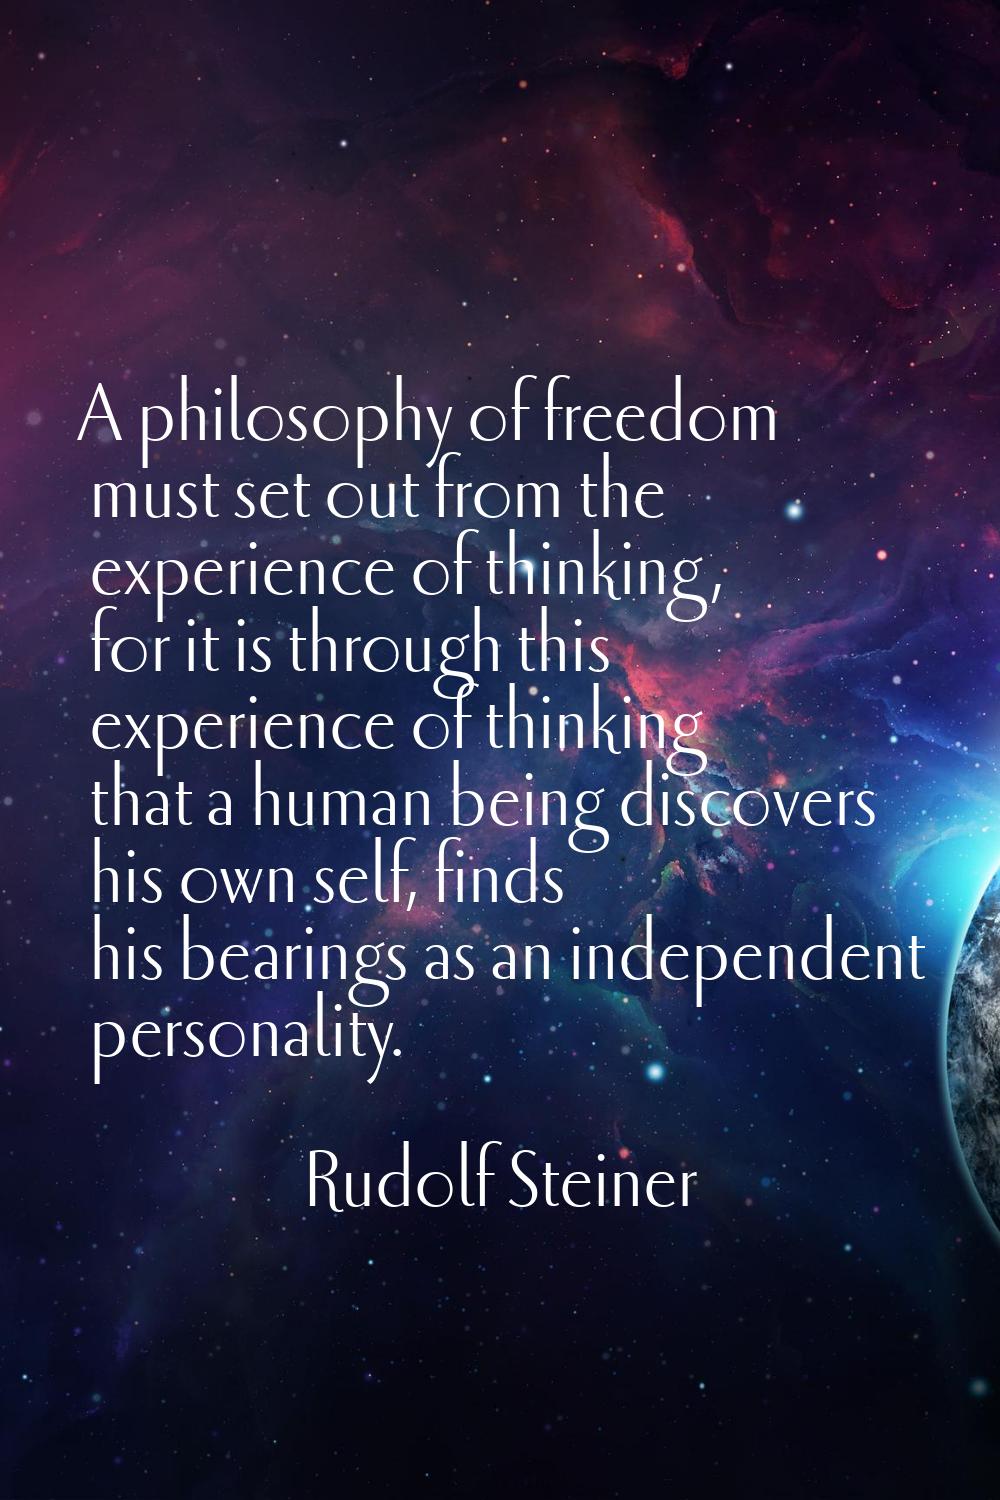 A philosophy of freedom must set out from the experience of thinking, for it is through this experi